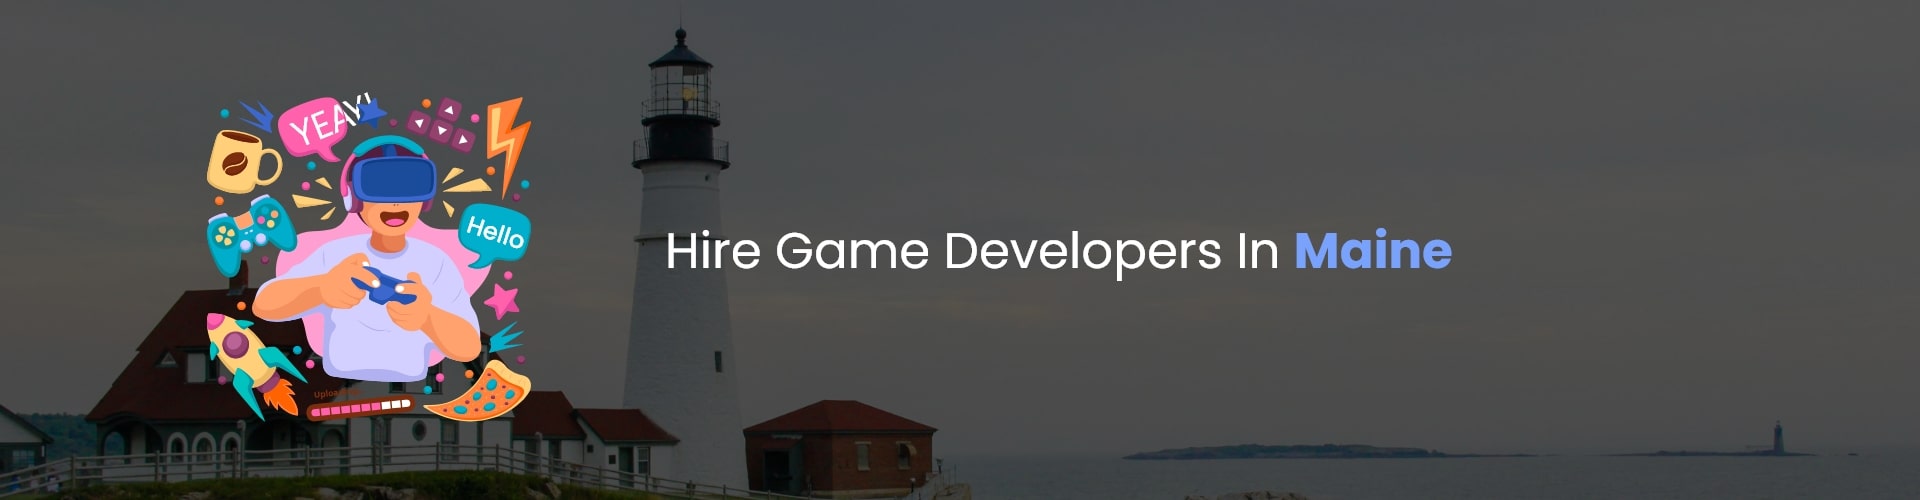 hire game developers in maine